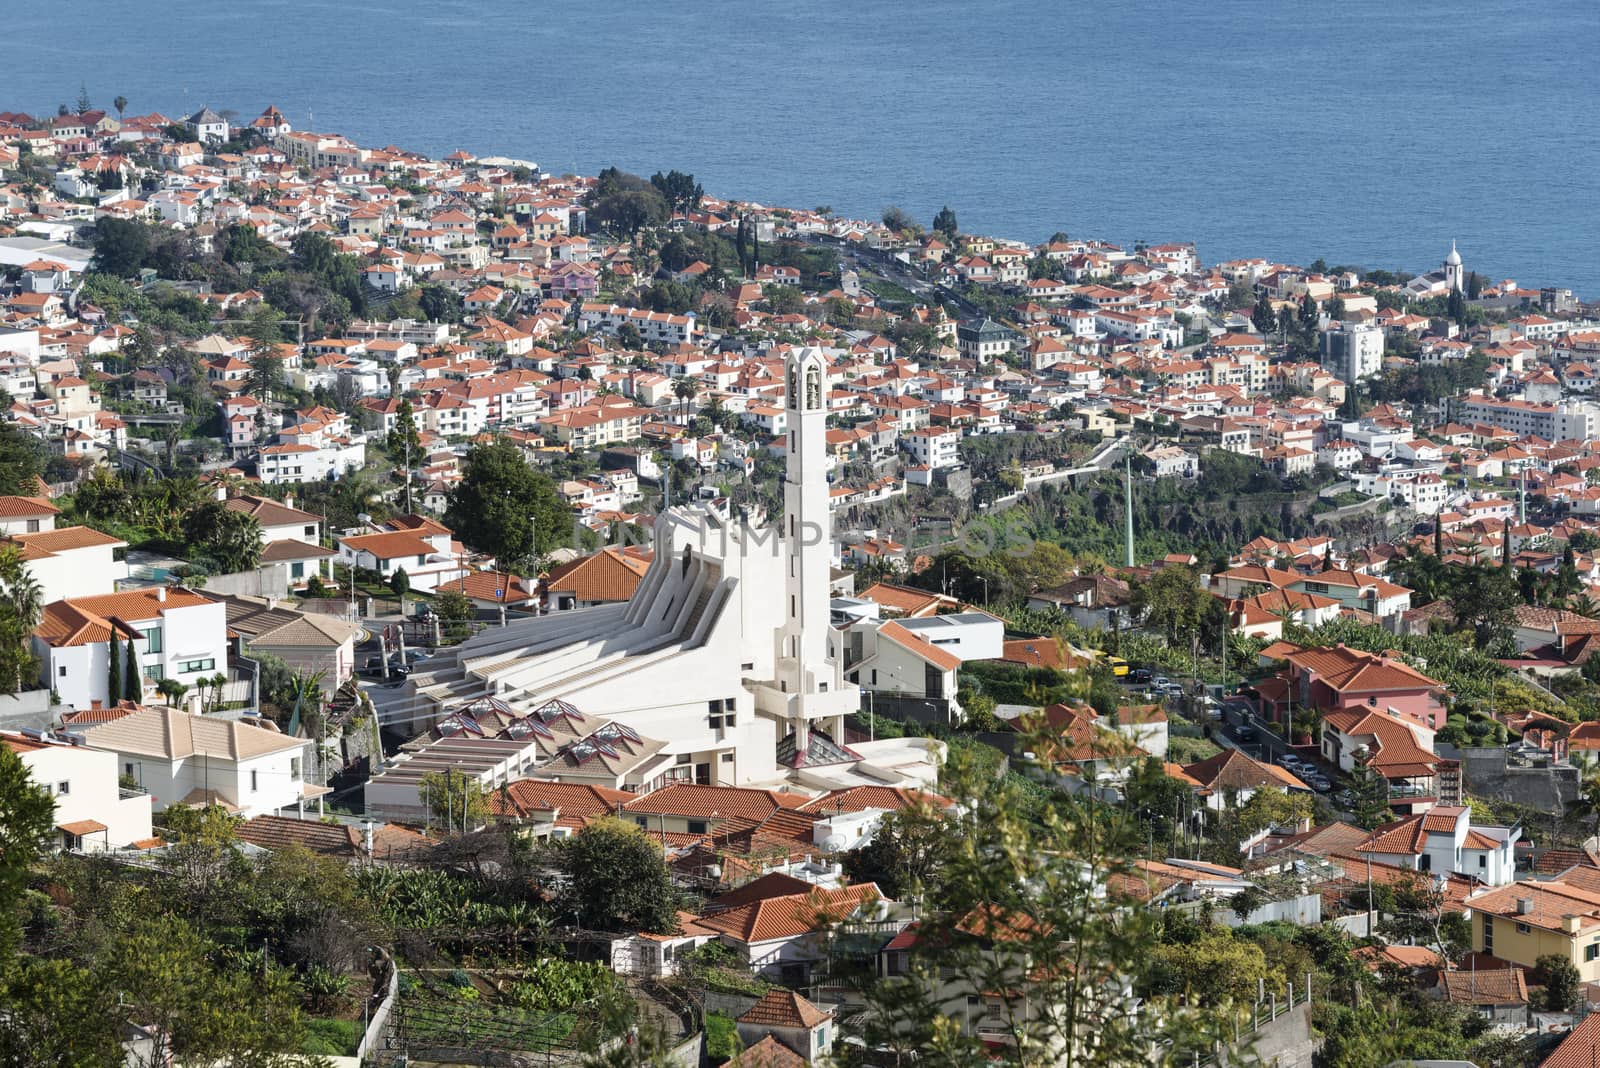 skyline Funchal Madeira with Sao Martinho church and the hilltops overlooking the southern coast of Madeira